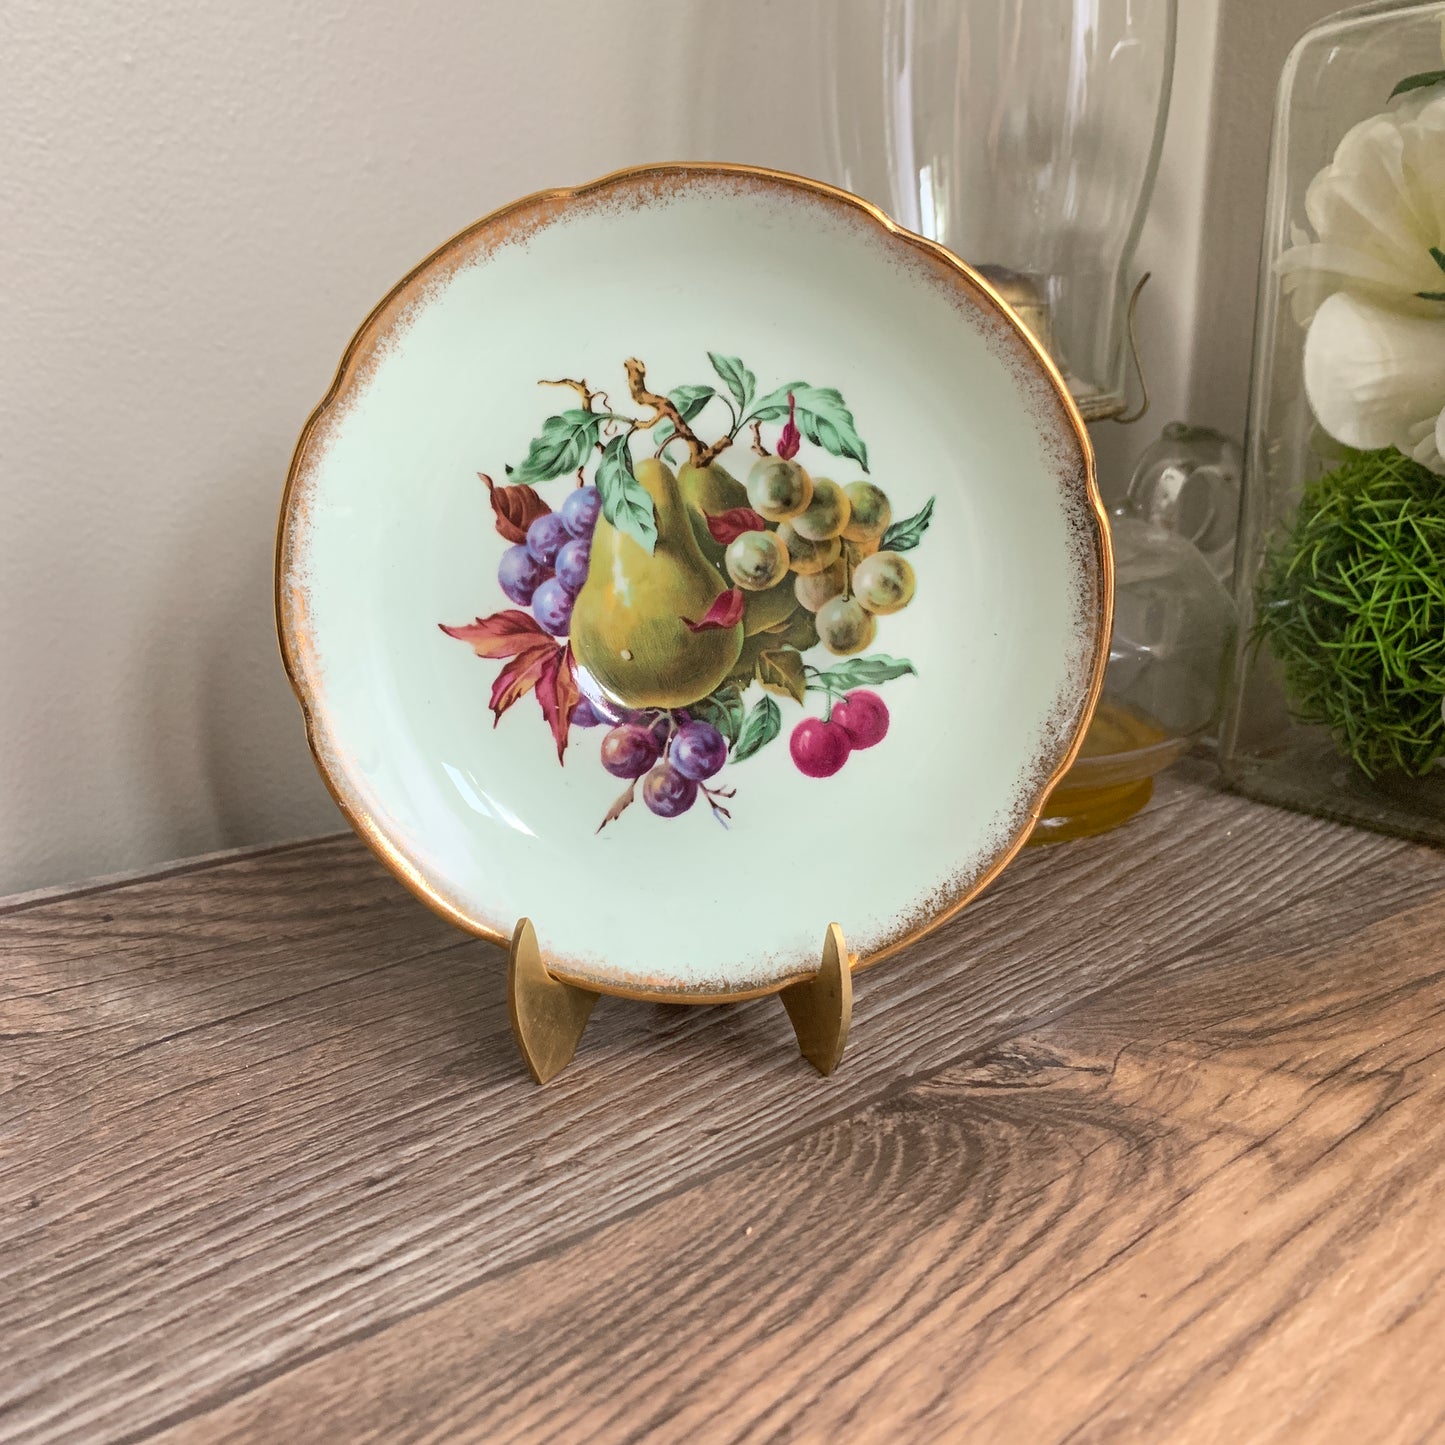 Royal Grafton Replacement Saucer Pale Green Saucer with Pears and Grapes